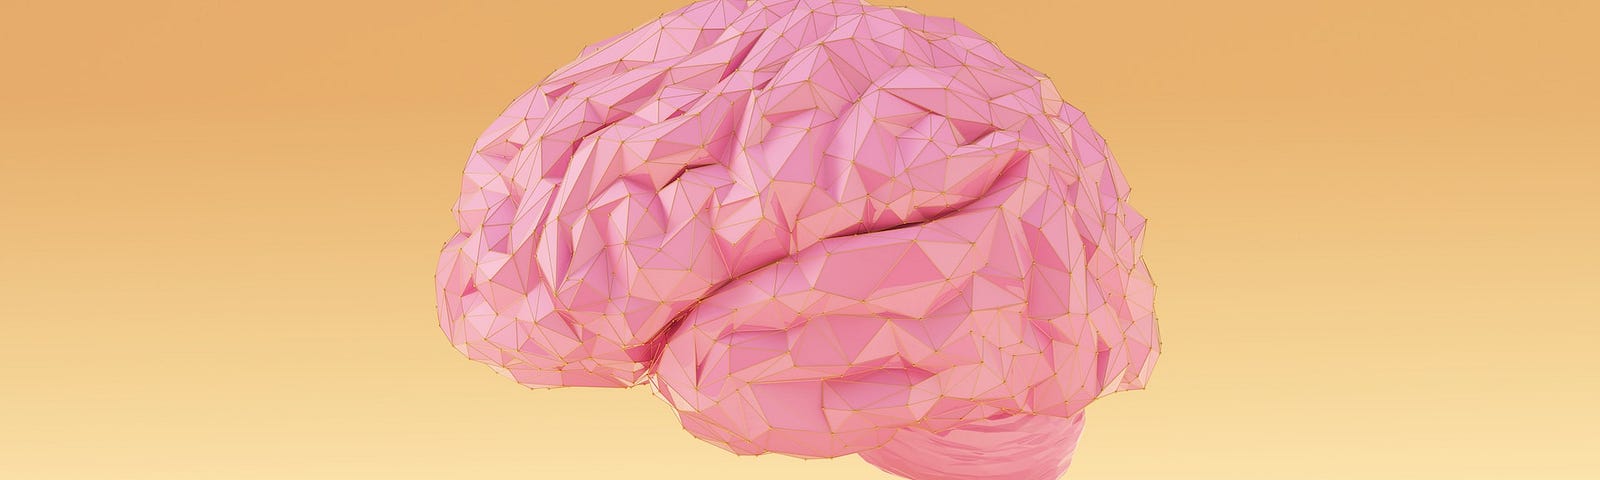 Digital illustration of a brain on a yellow background.